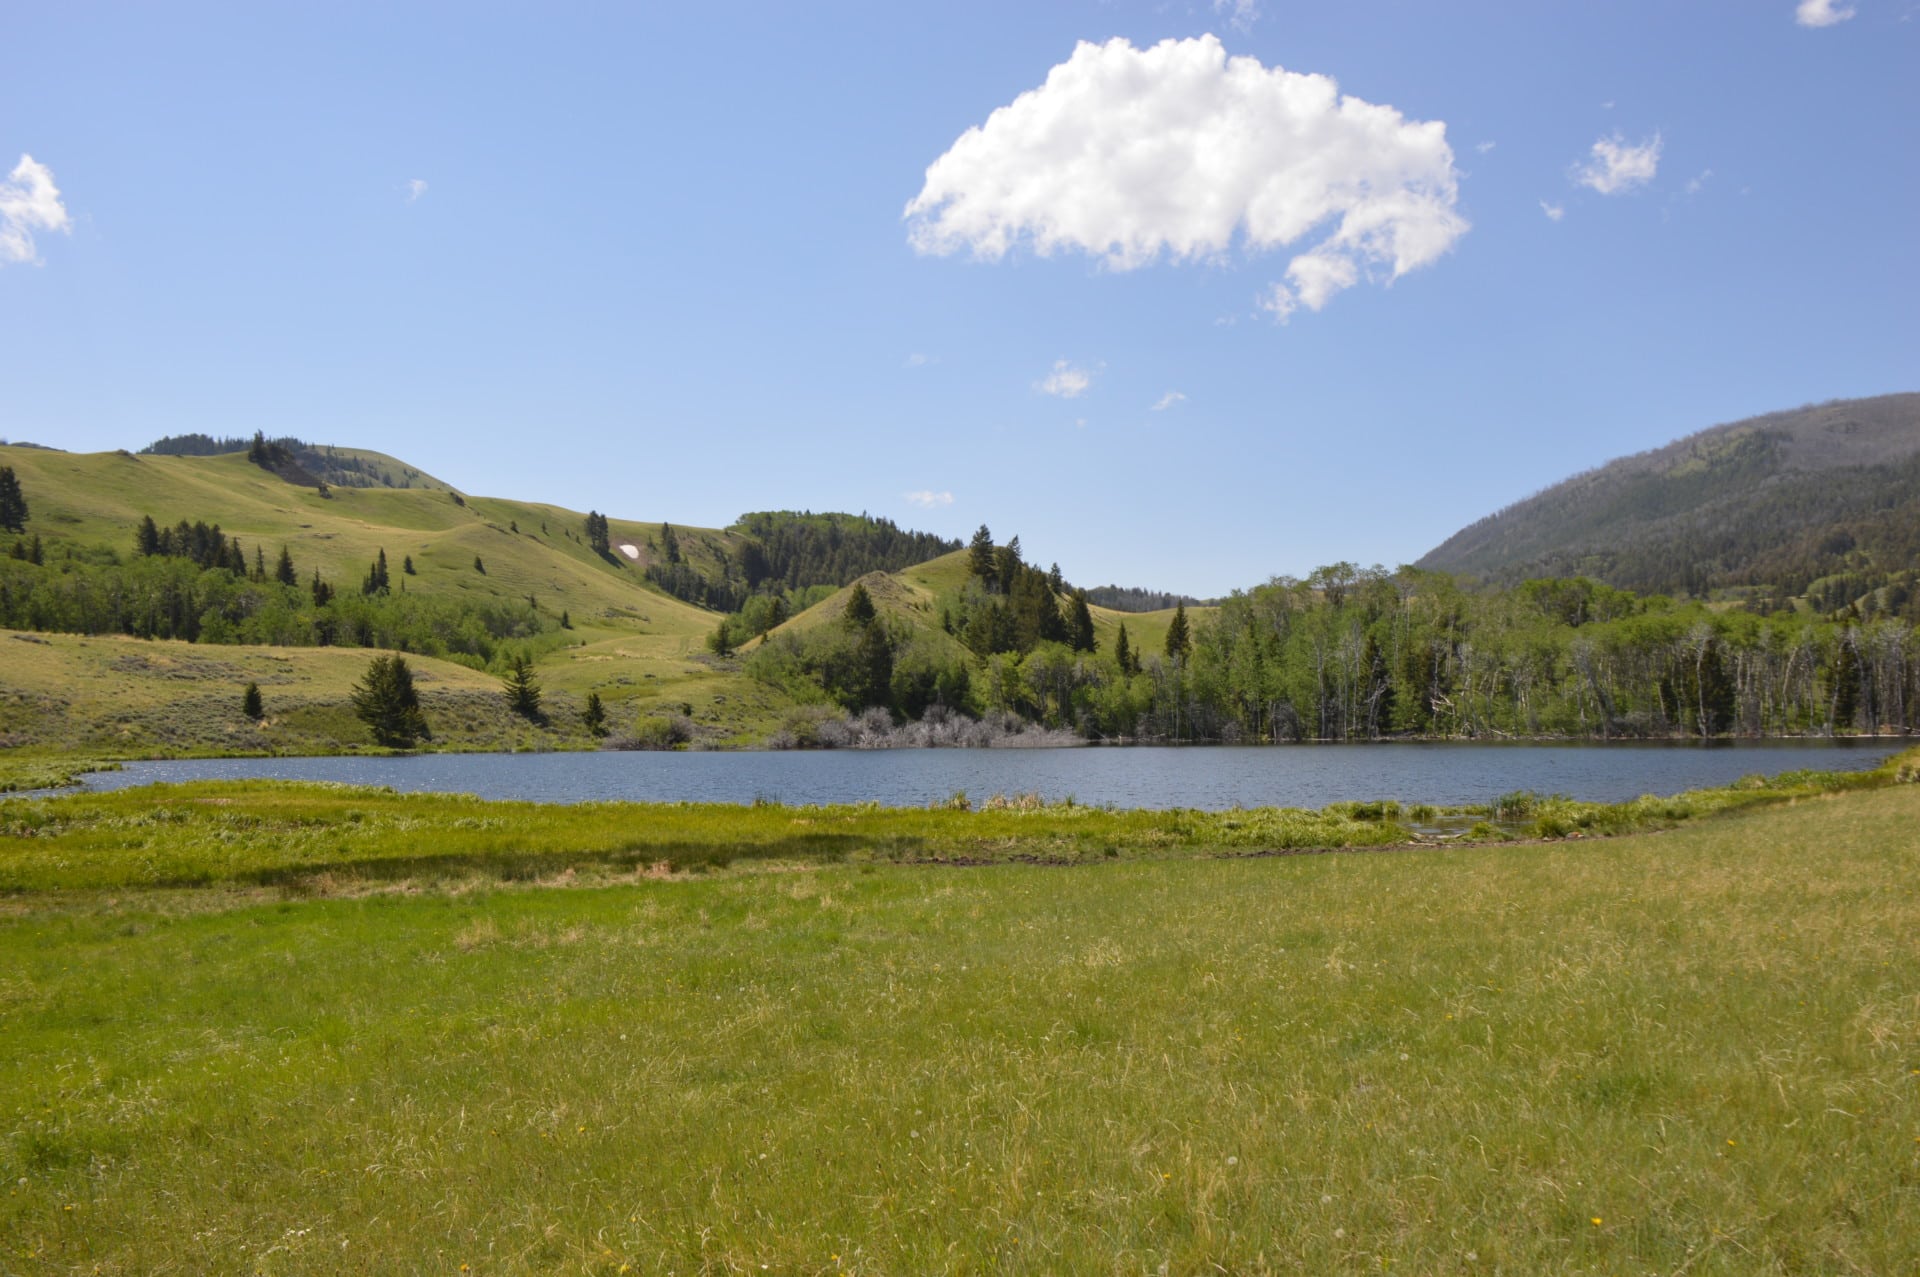 Yellowstone Property For Sale Montana Dome Mountain Ranch